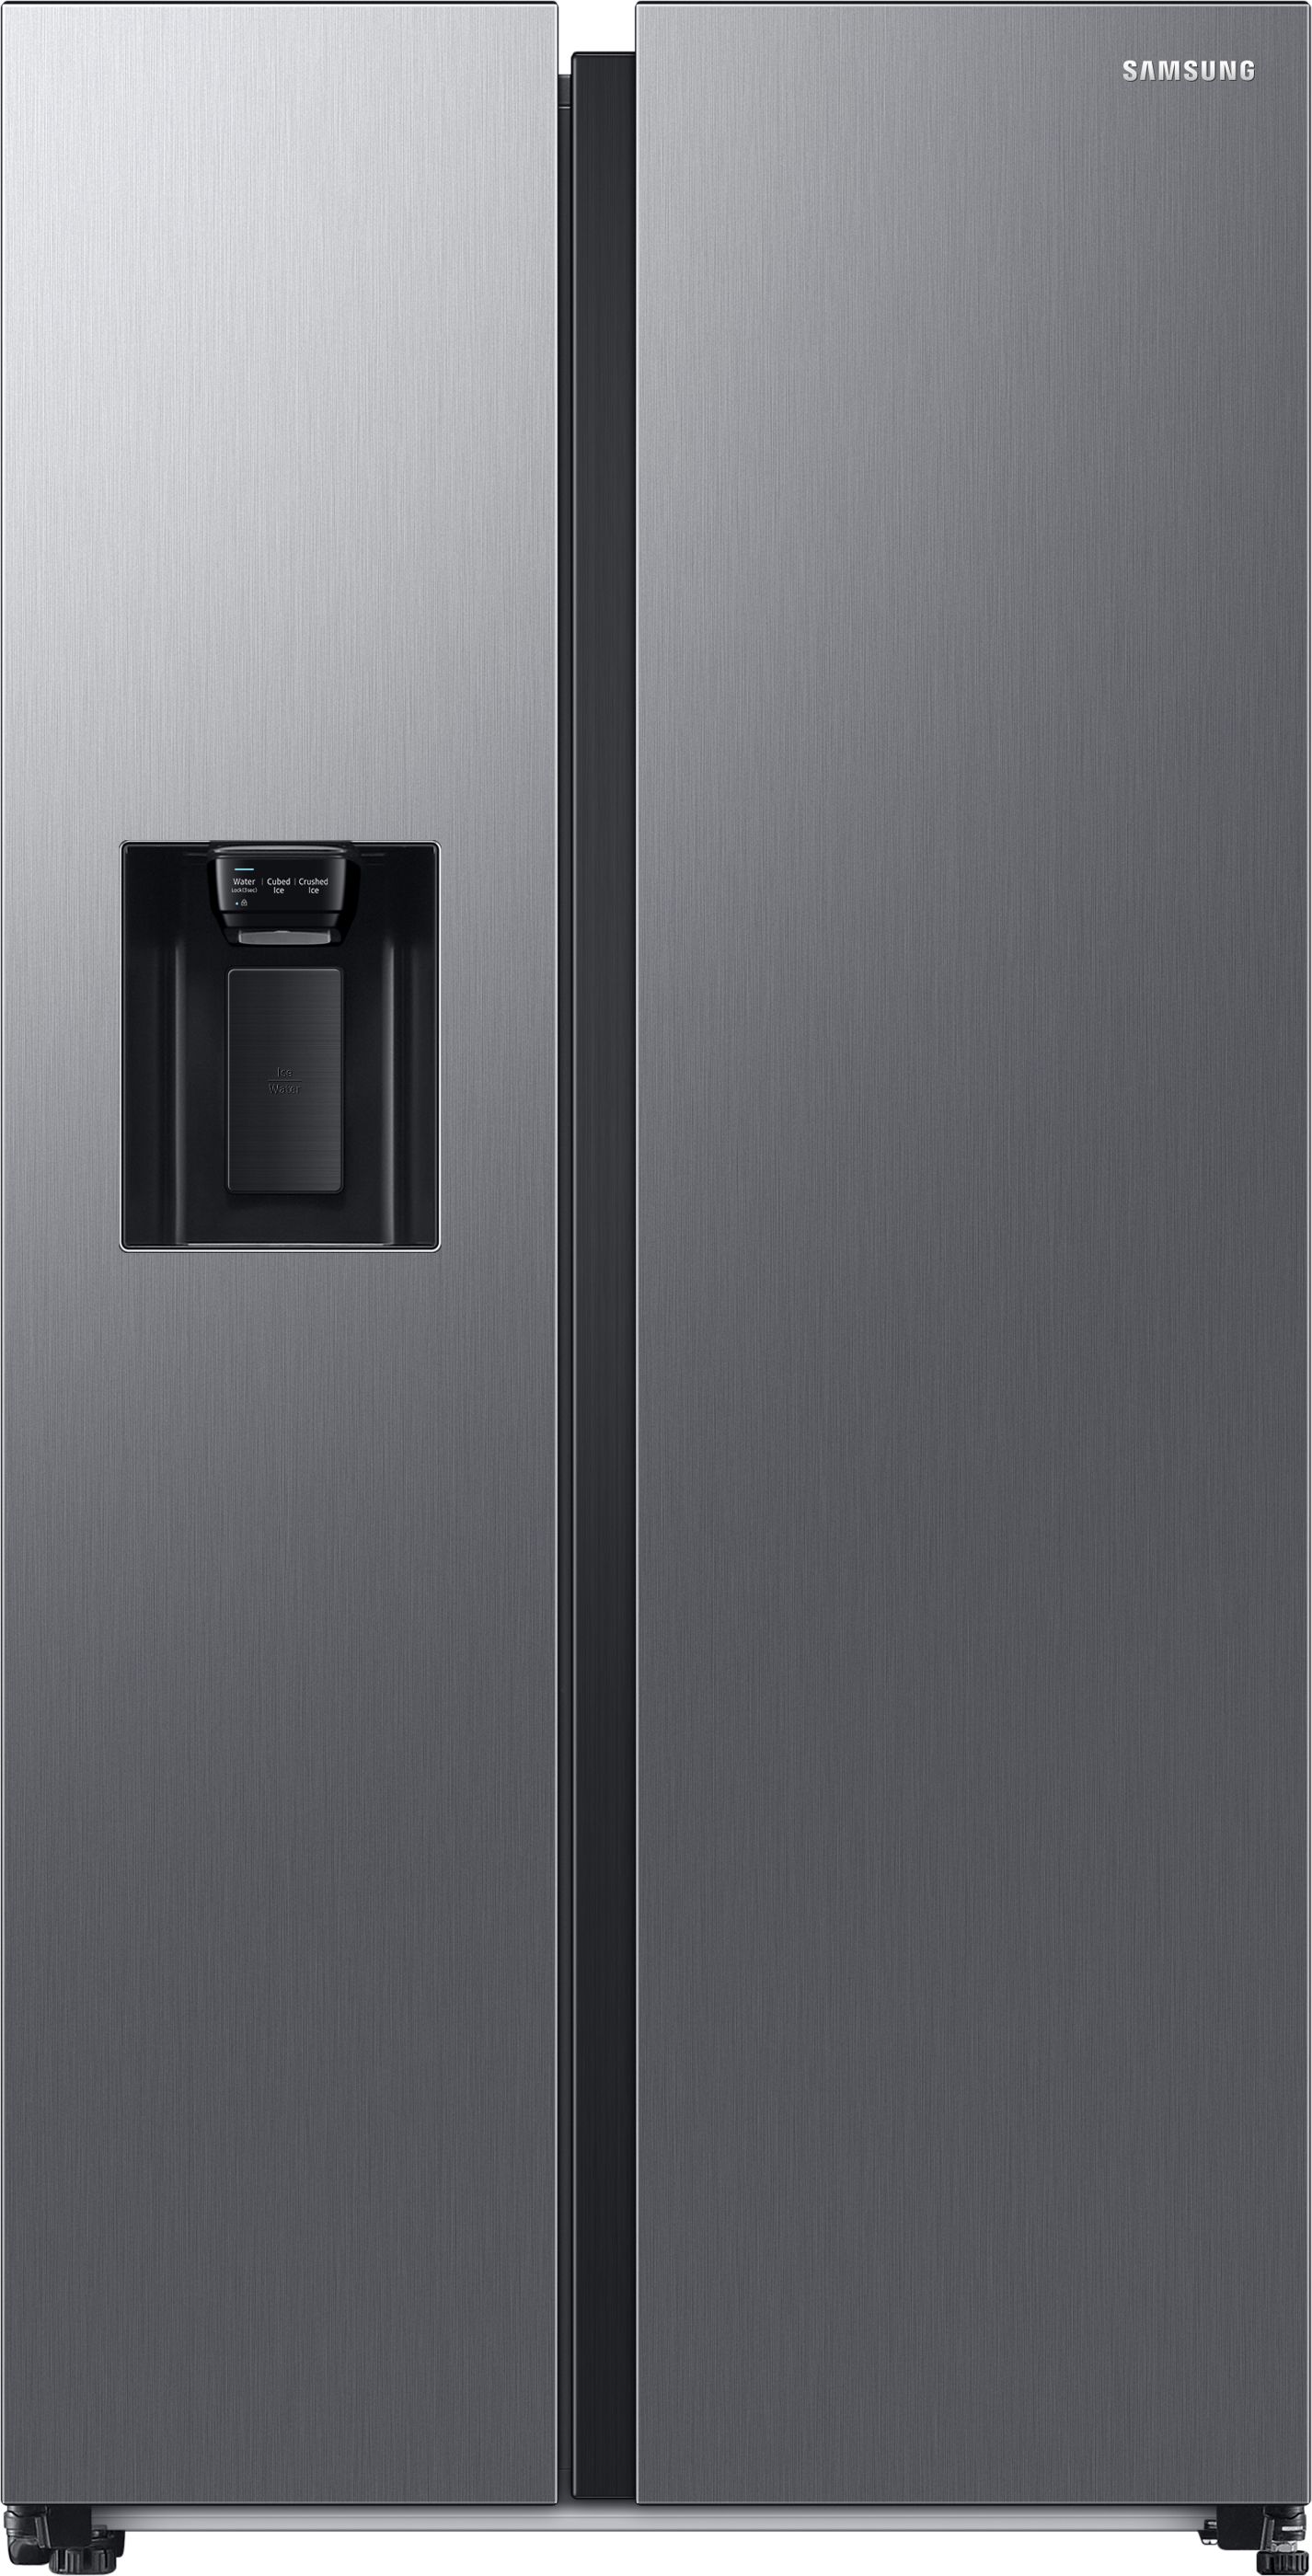 Samsung Series 8 RS68CG885ES9 Wifi Connected Plumbed Total No Frost American Fridge Freezer - Matte Stainless Steel - E Rated, Stainless Steel